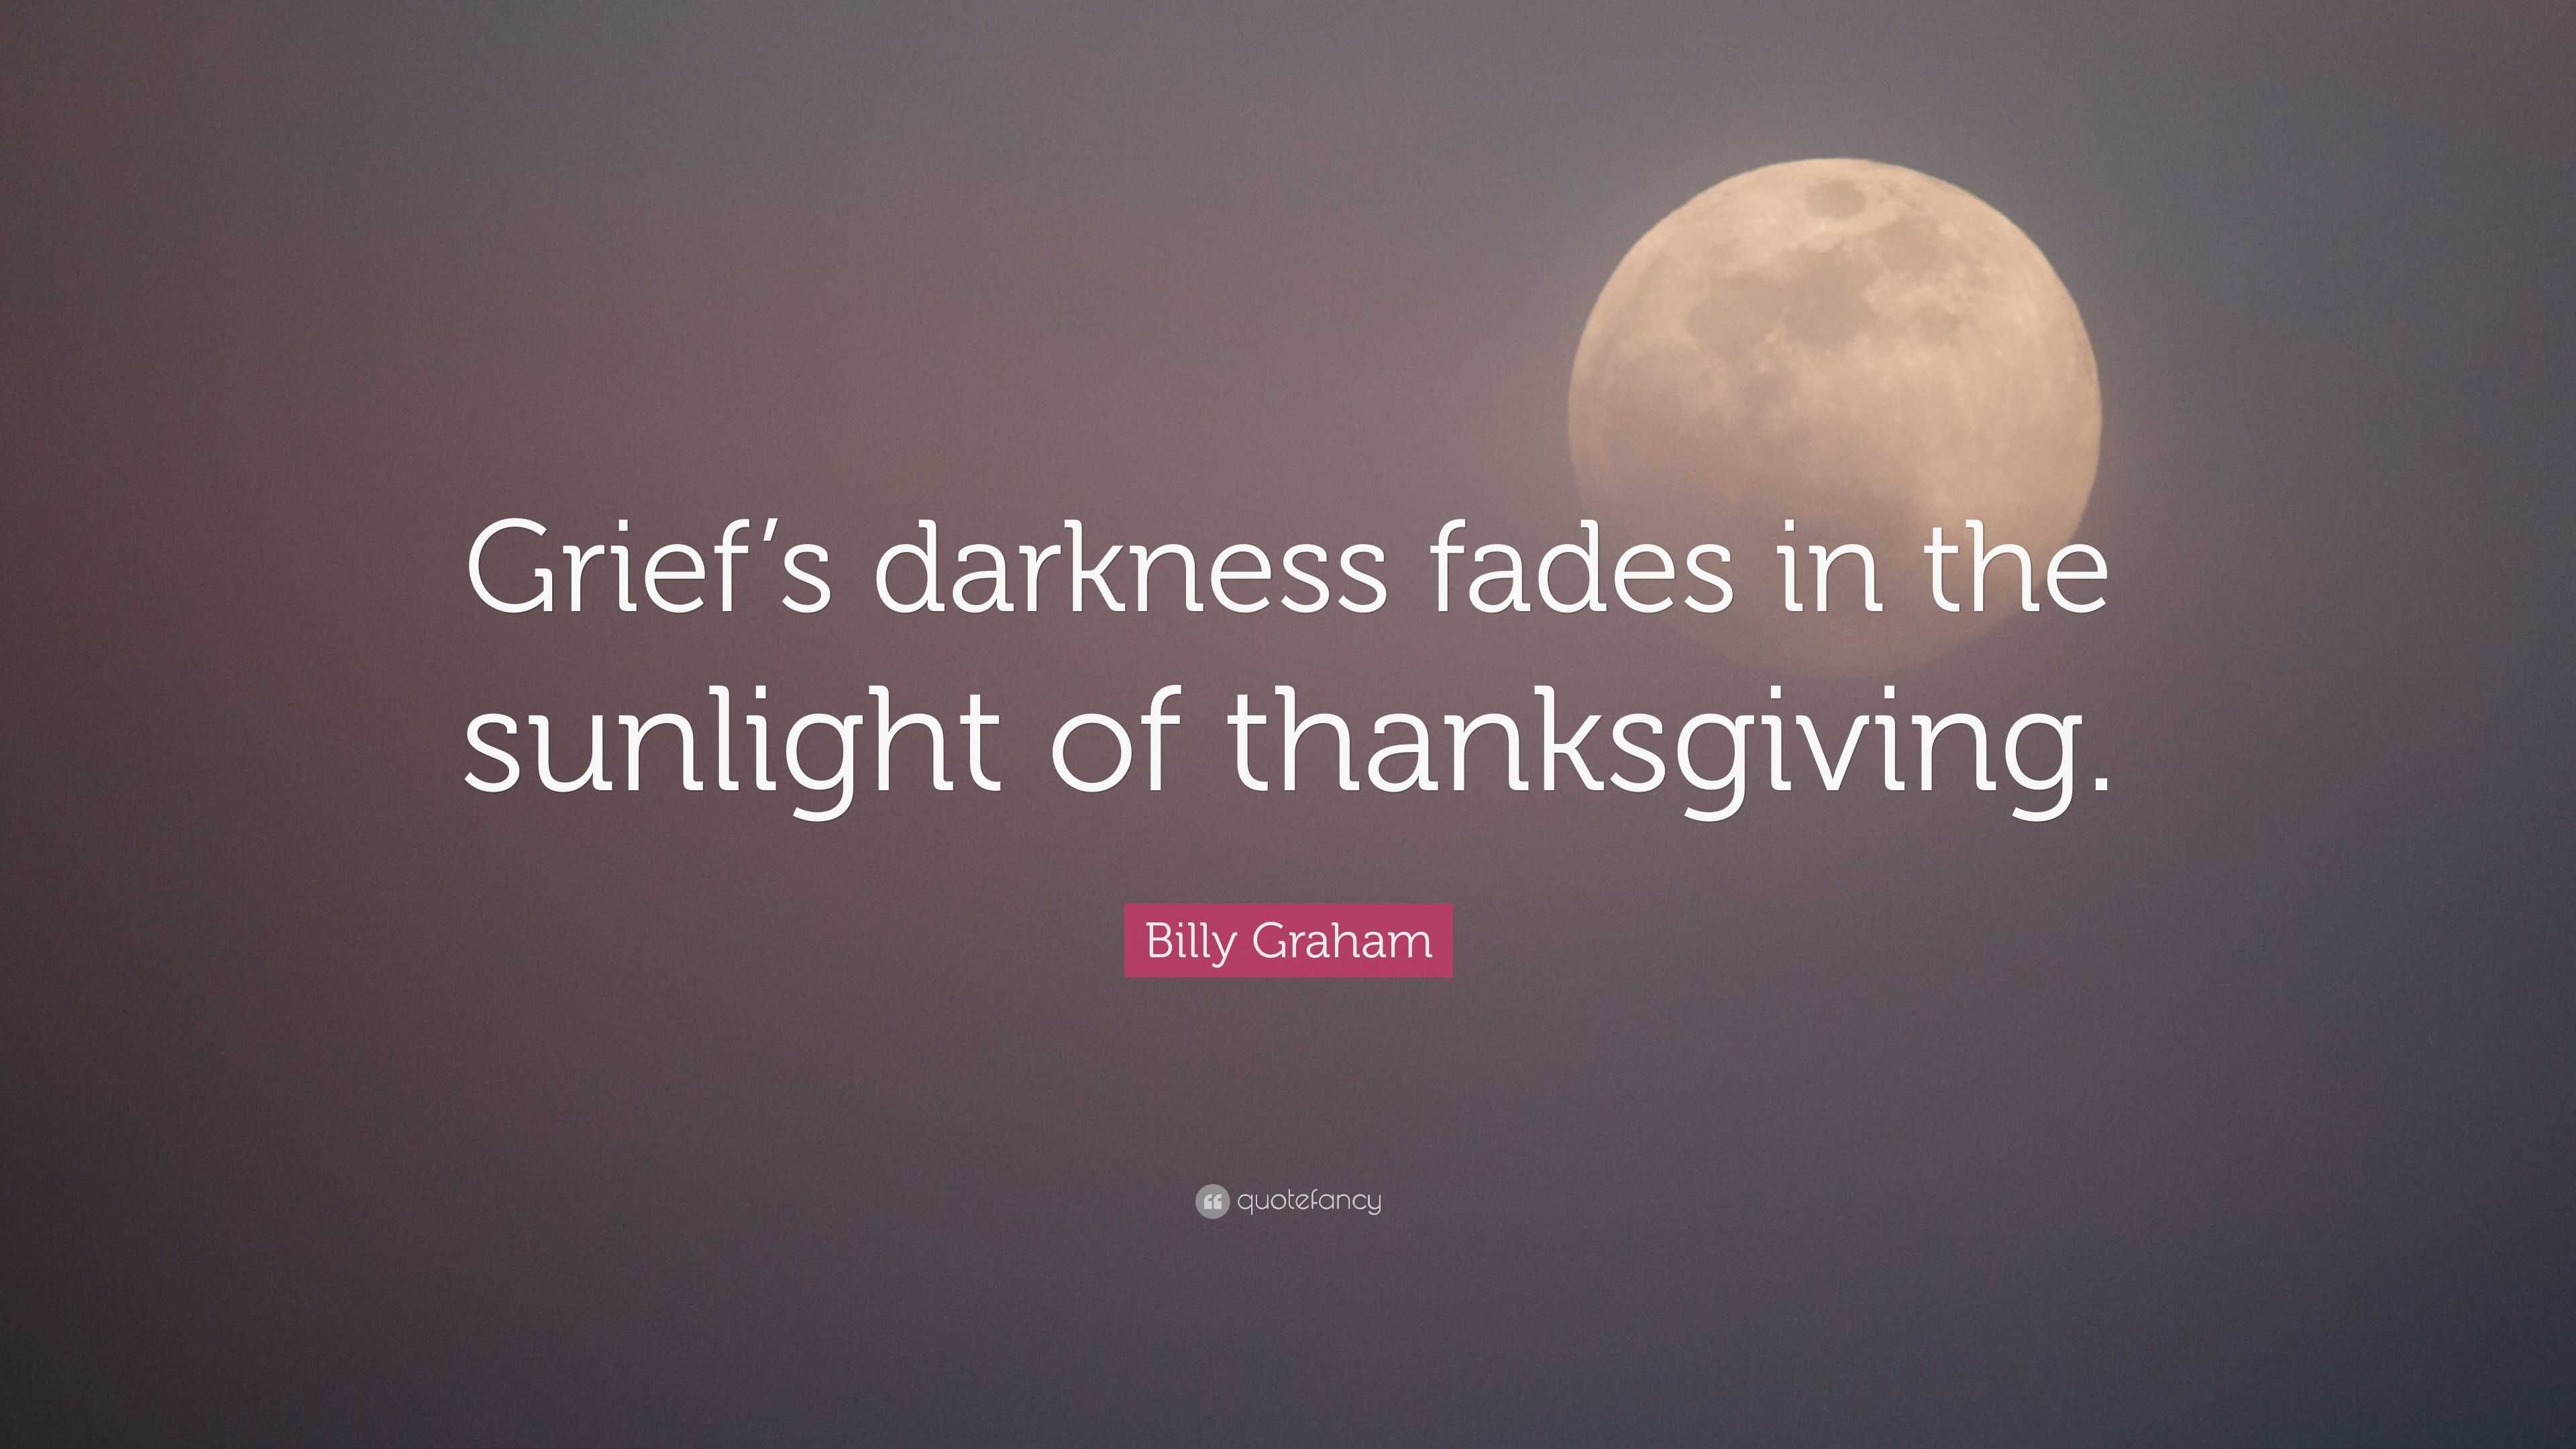 Billy Graham Quote: "Grief's darkness fades in the ...